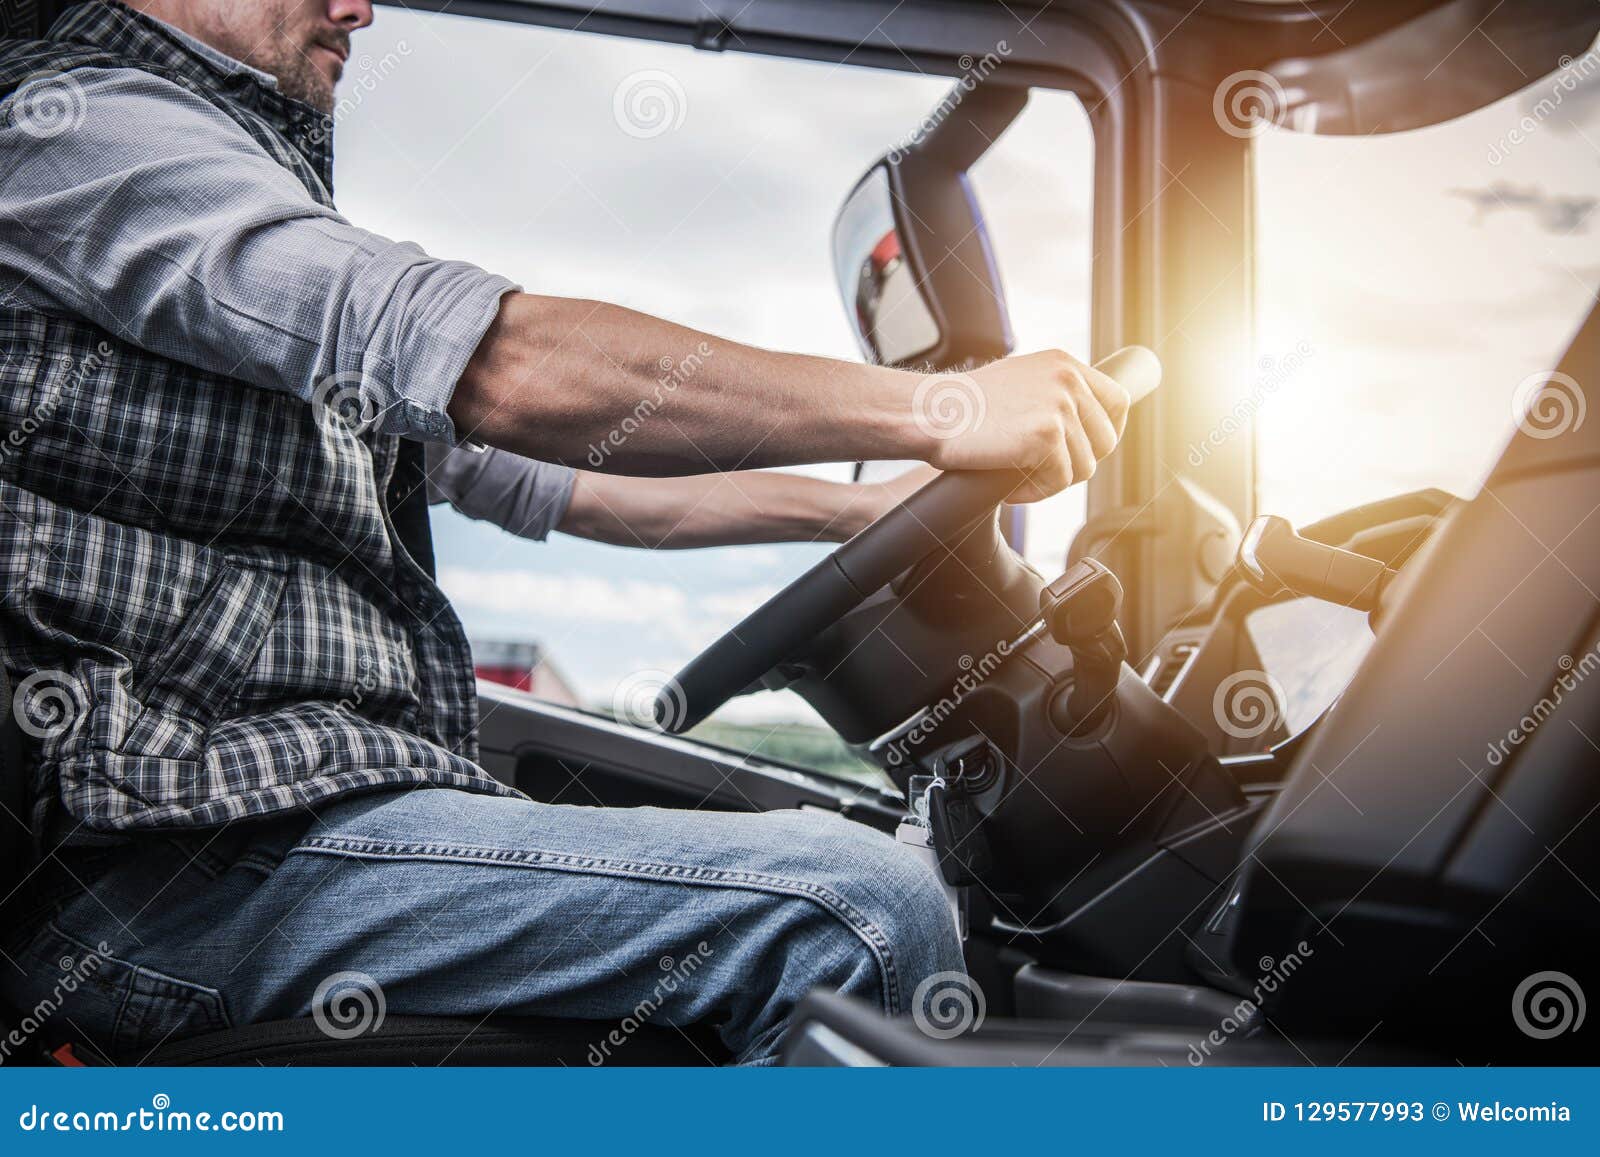 truck driver behind the wheel